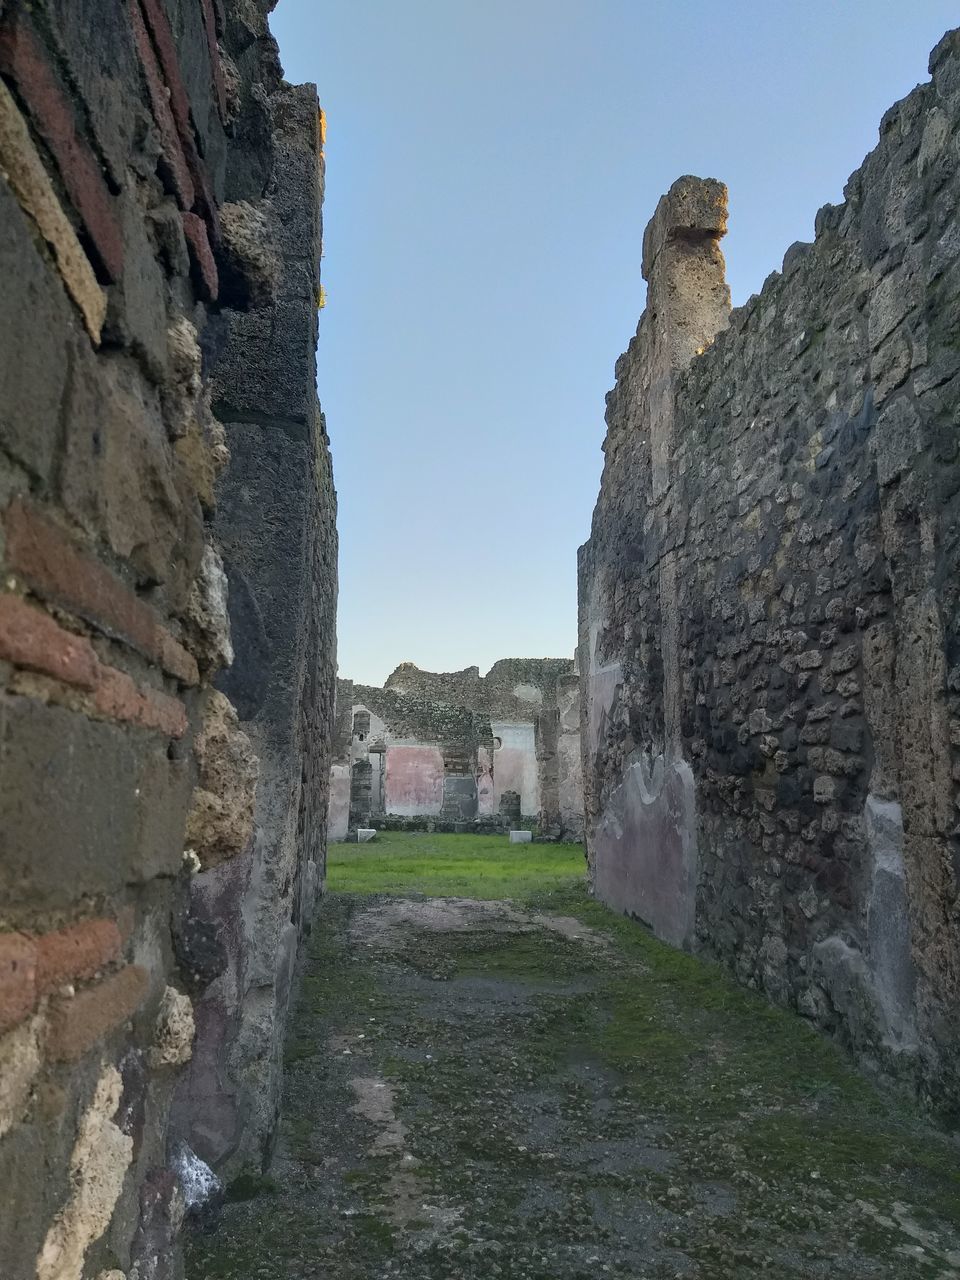 VIEW OF FORT AGAINST BUILDINGS